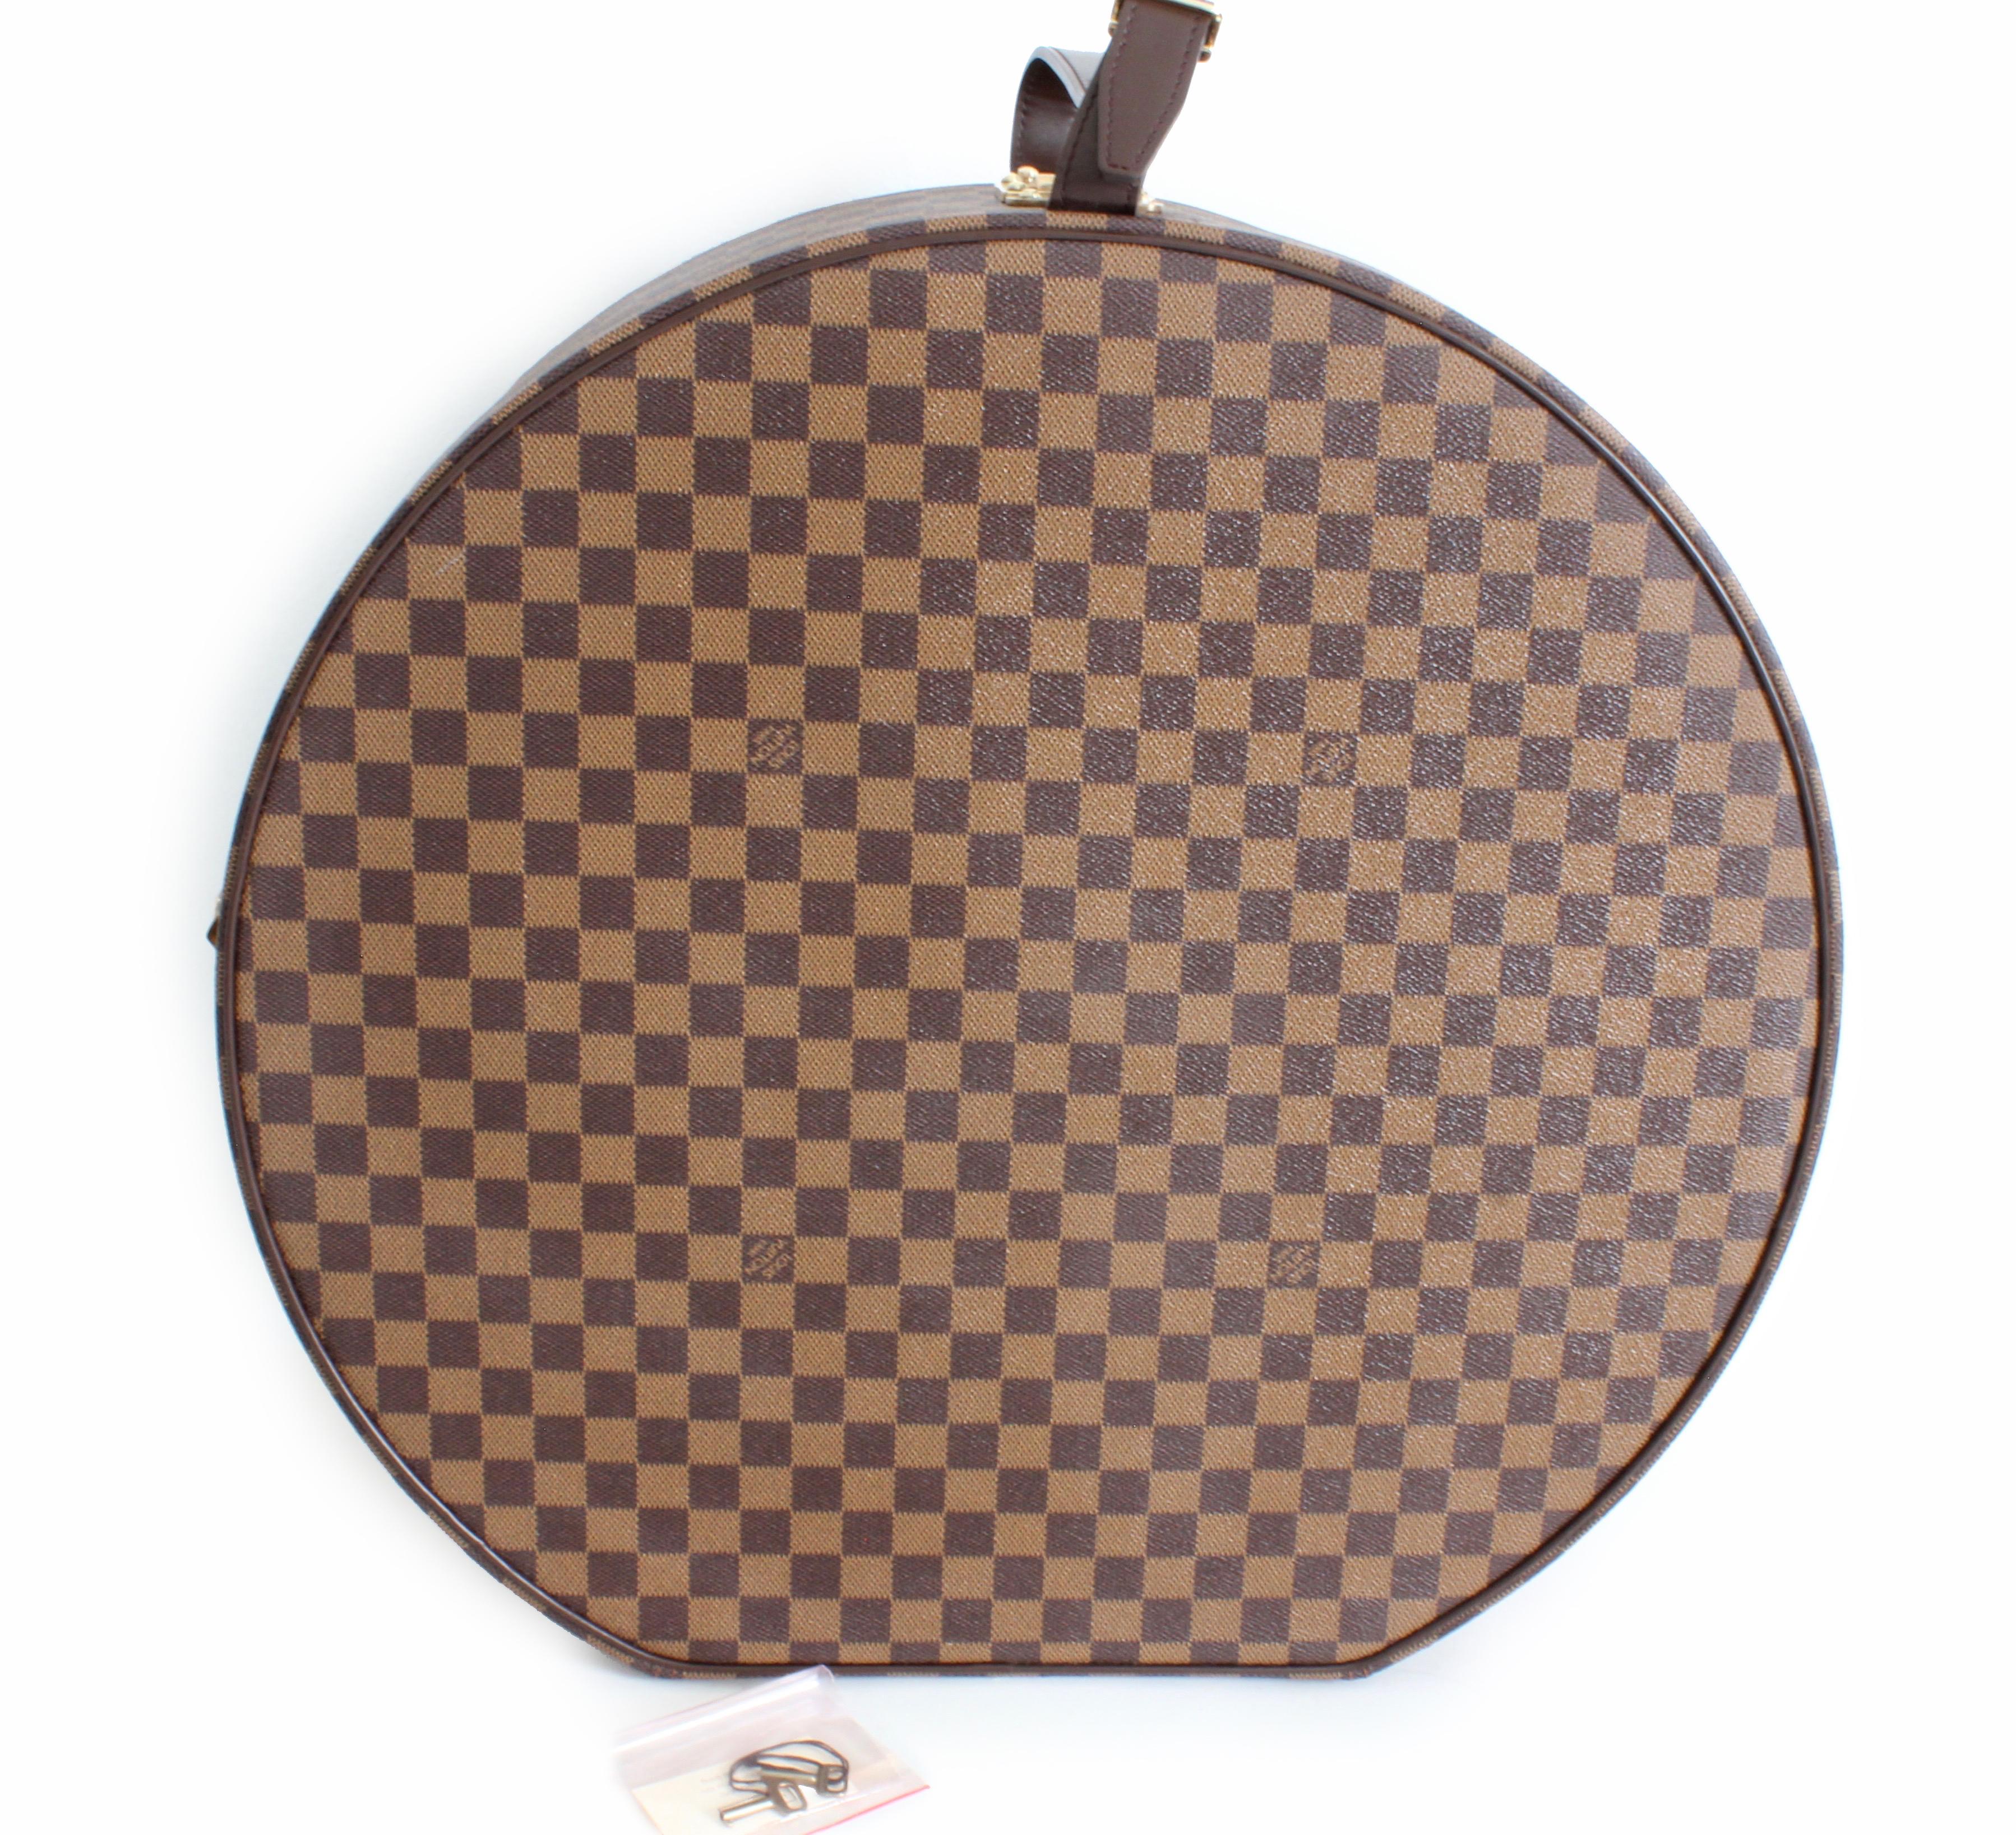 This large 50cm Damier Ebene Canvas hat box was made by Louis Vuitton in 2004.  It fastens with two side latches and one locking S-lock fastener.  Fully-lined in red fabric with an elasticized pocket.  Comes with it's original keys, too.  This piece